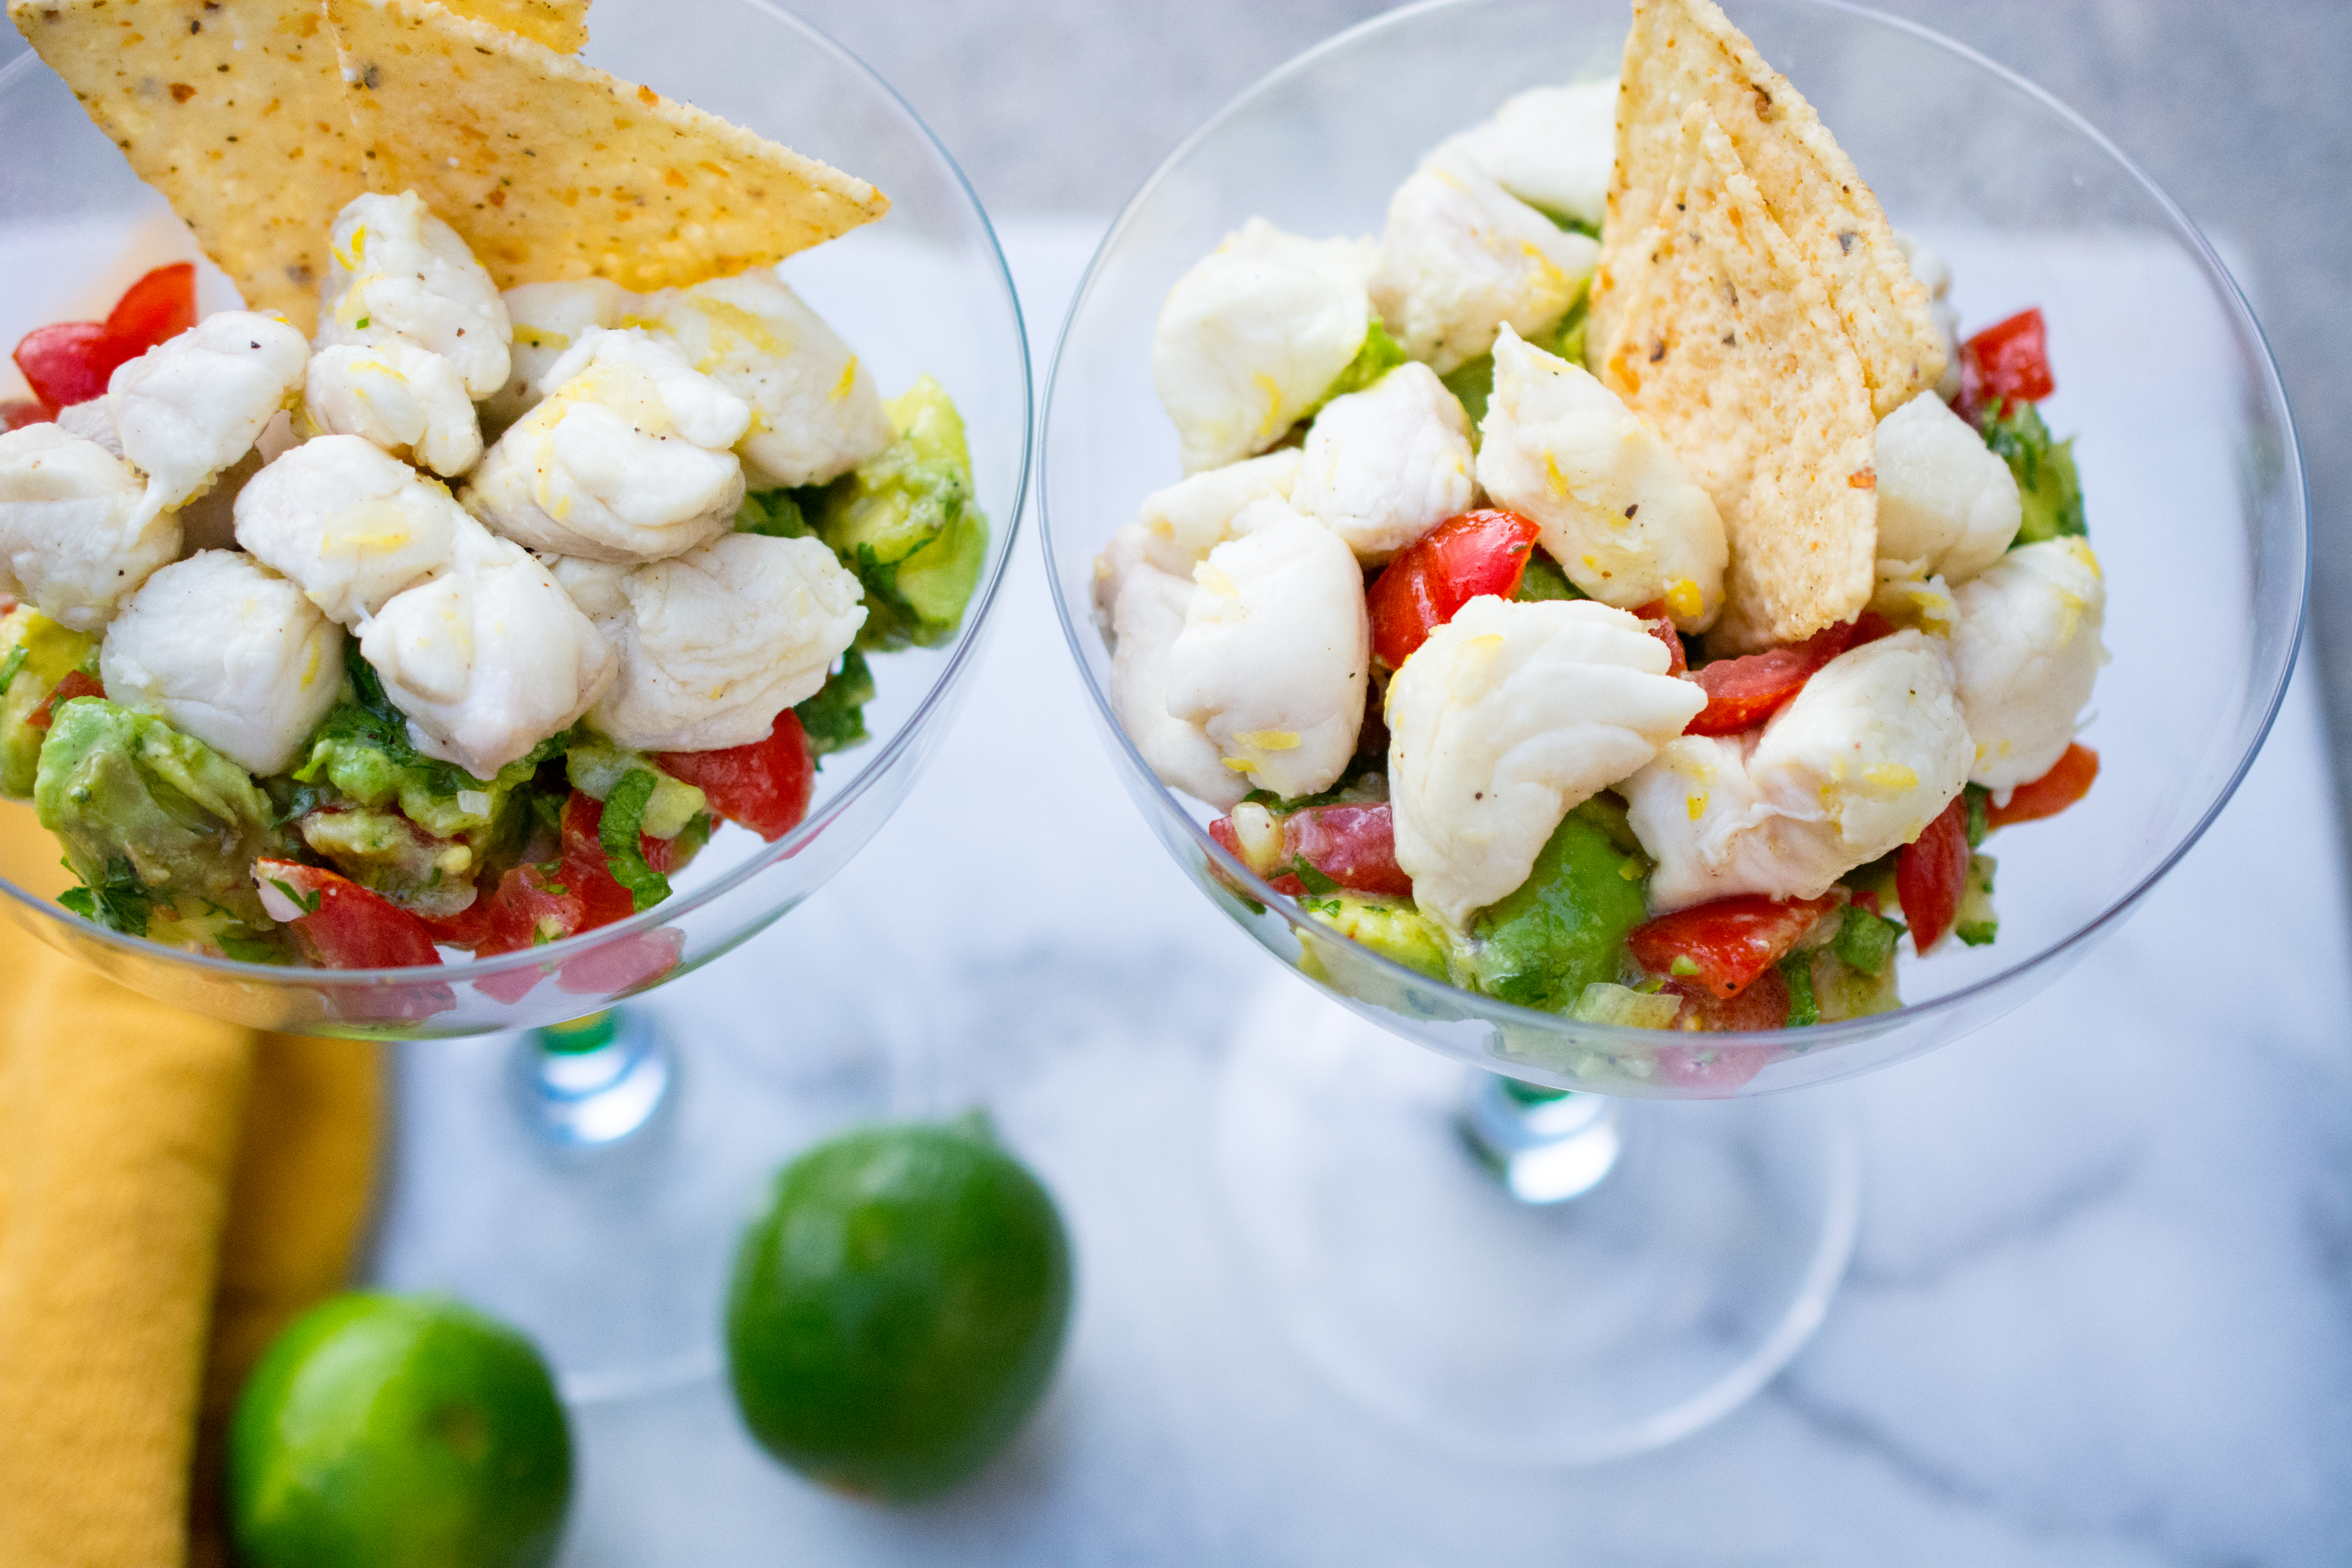 Summertime Smoked Ceviche Salad